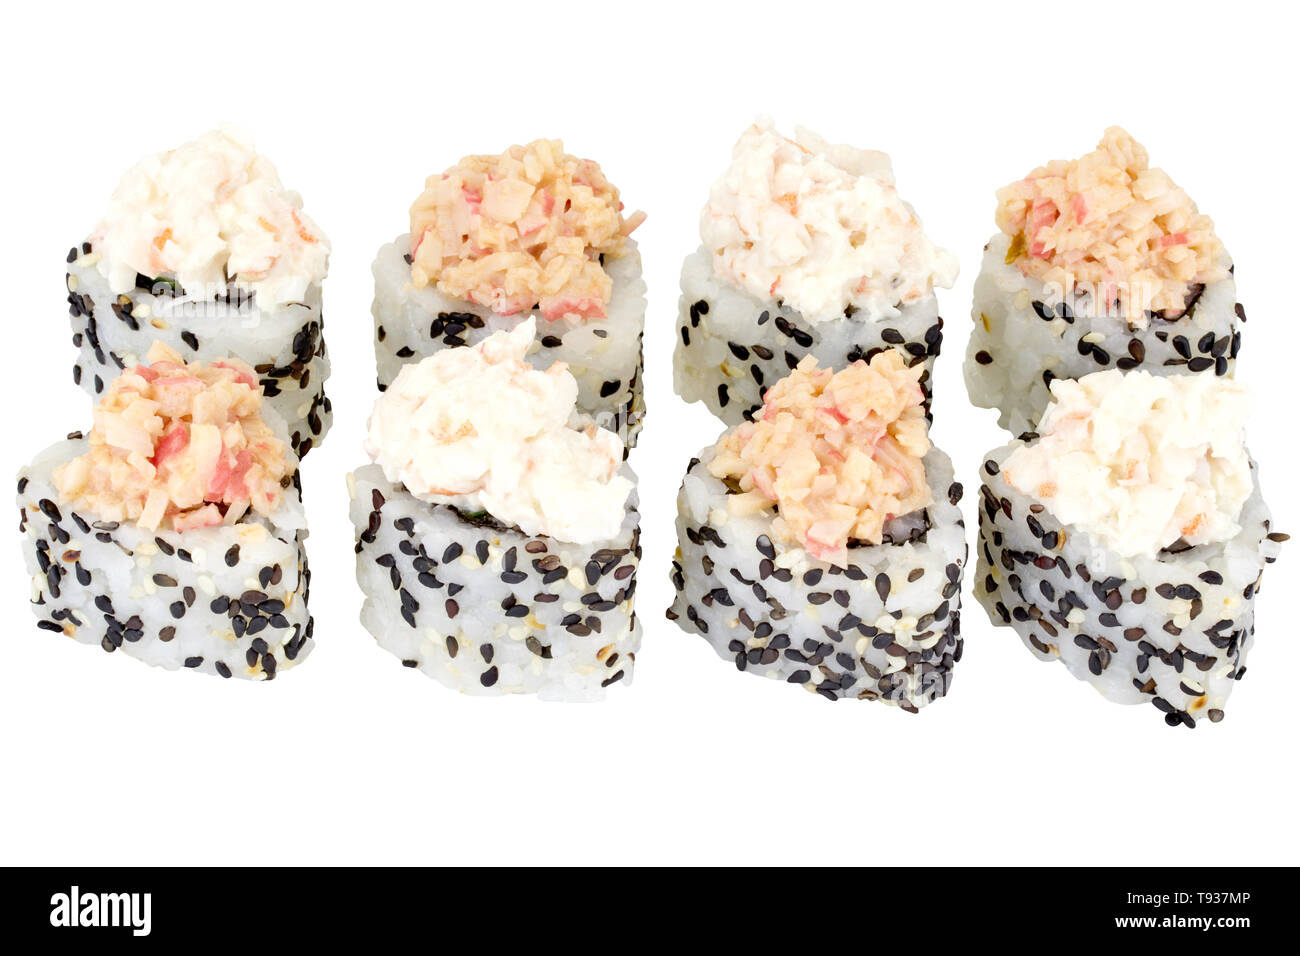 Sushi roll japanese food isolated on white background Philadelphia sushi roll with crab meat close up Stock Photo